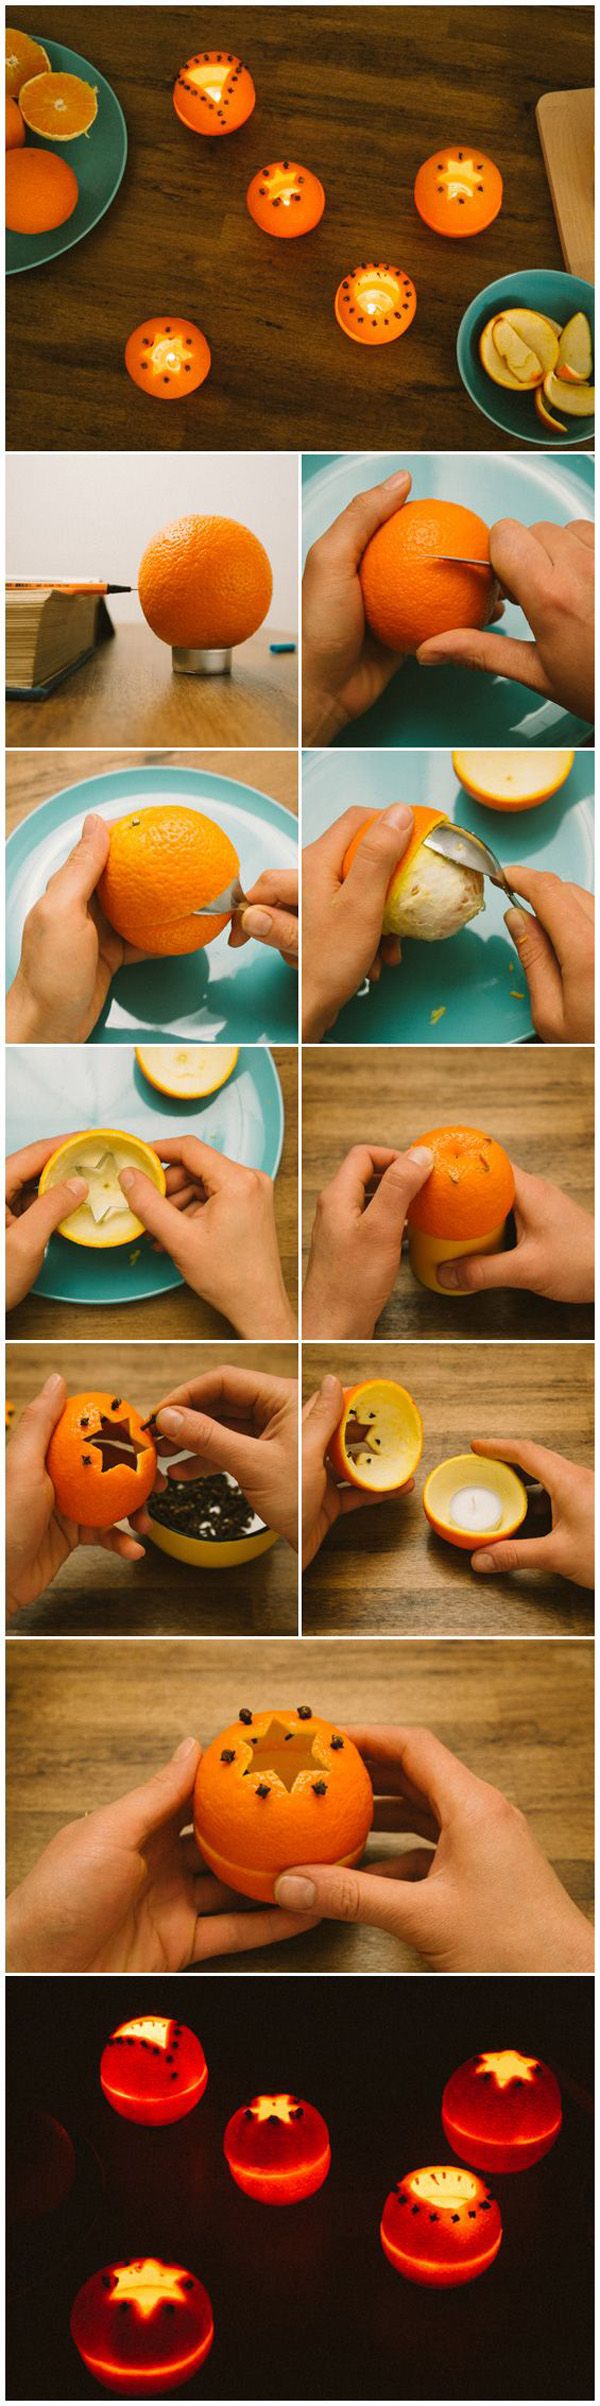 DIY candle holders made from oranges